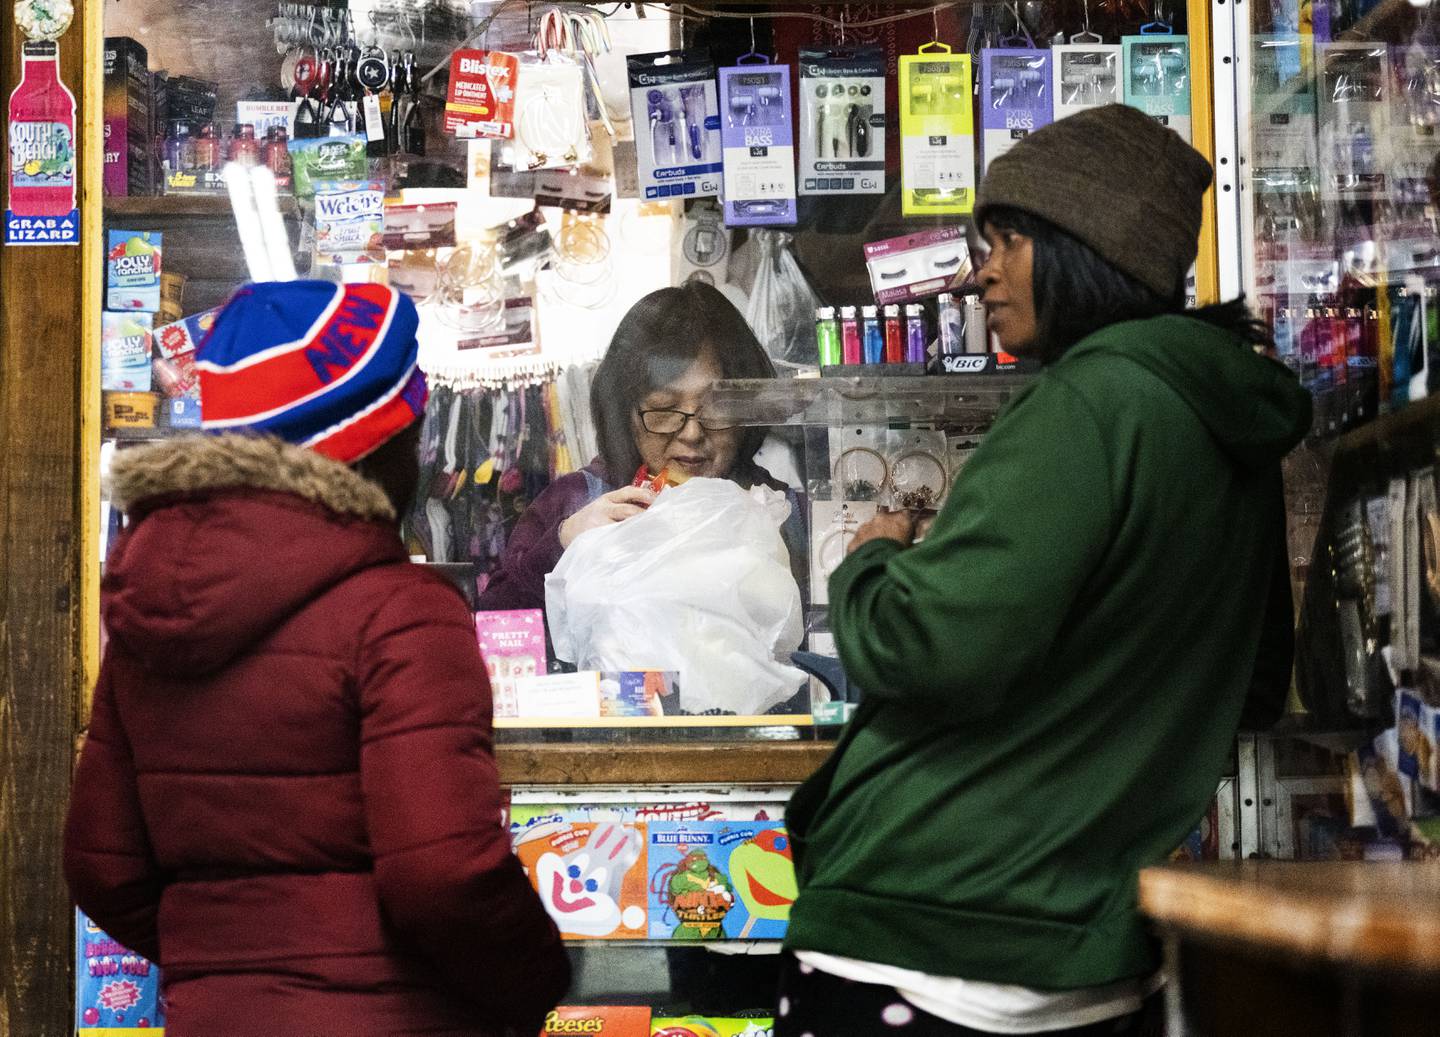 Tae Soon Lee bags the goods bought by Crystal William, 35, (left) and Nelvina Owens, 48, (right)at Lee's Mini Market, in Baltimore, Thursday, December 1, 2022.